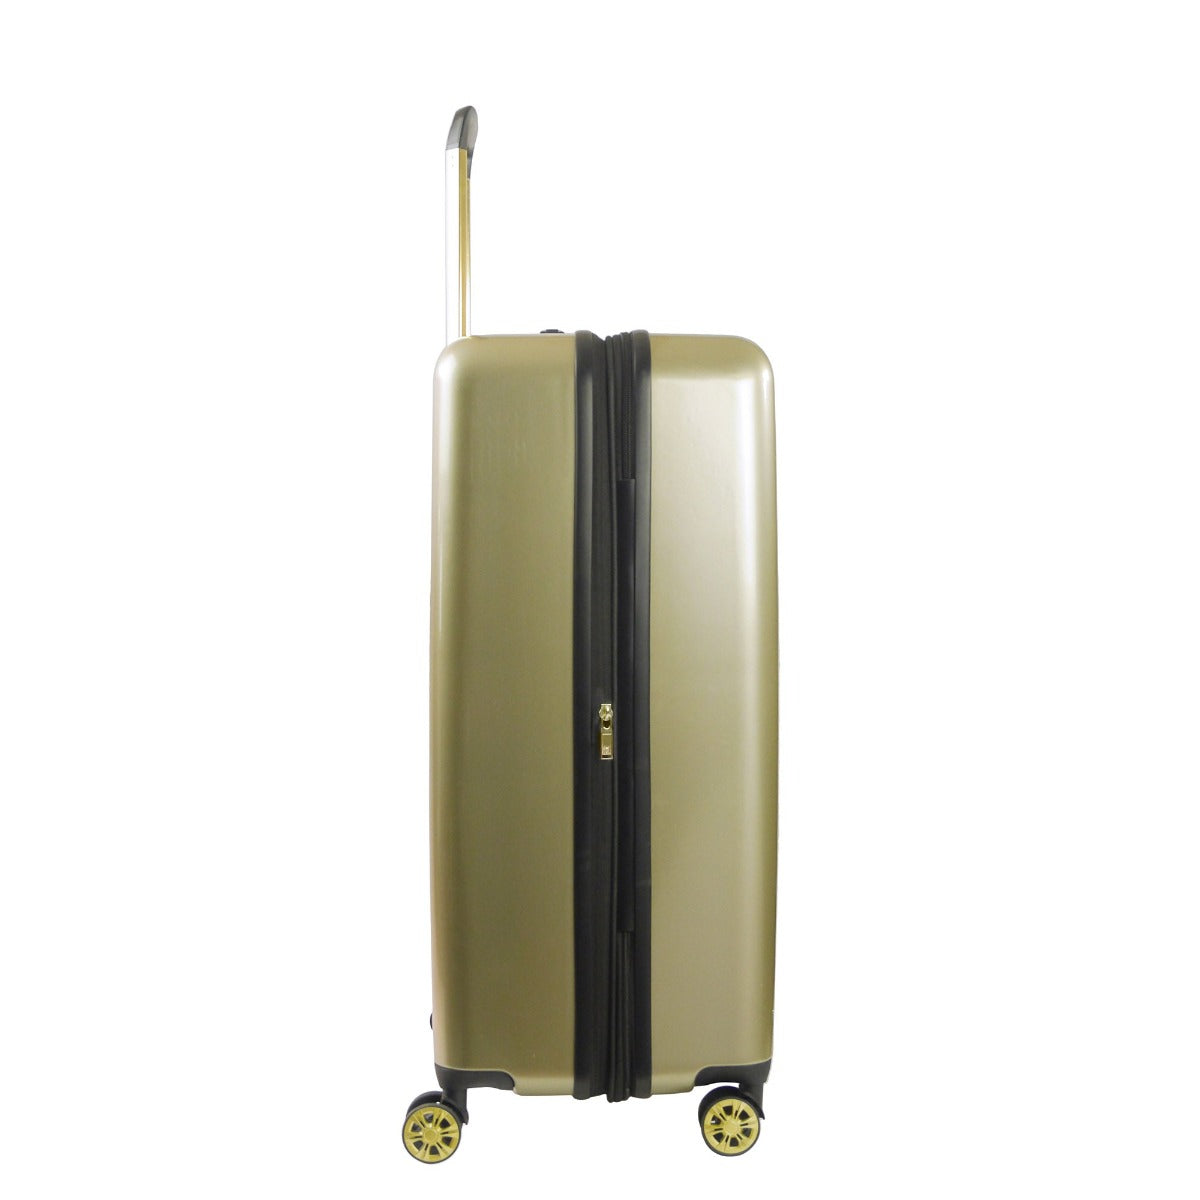 Ful Groove 31" hardside spinner suitcase gold checked luggage black details